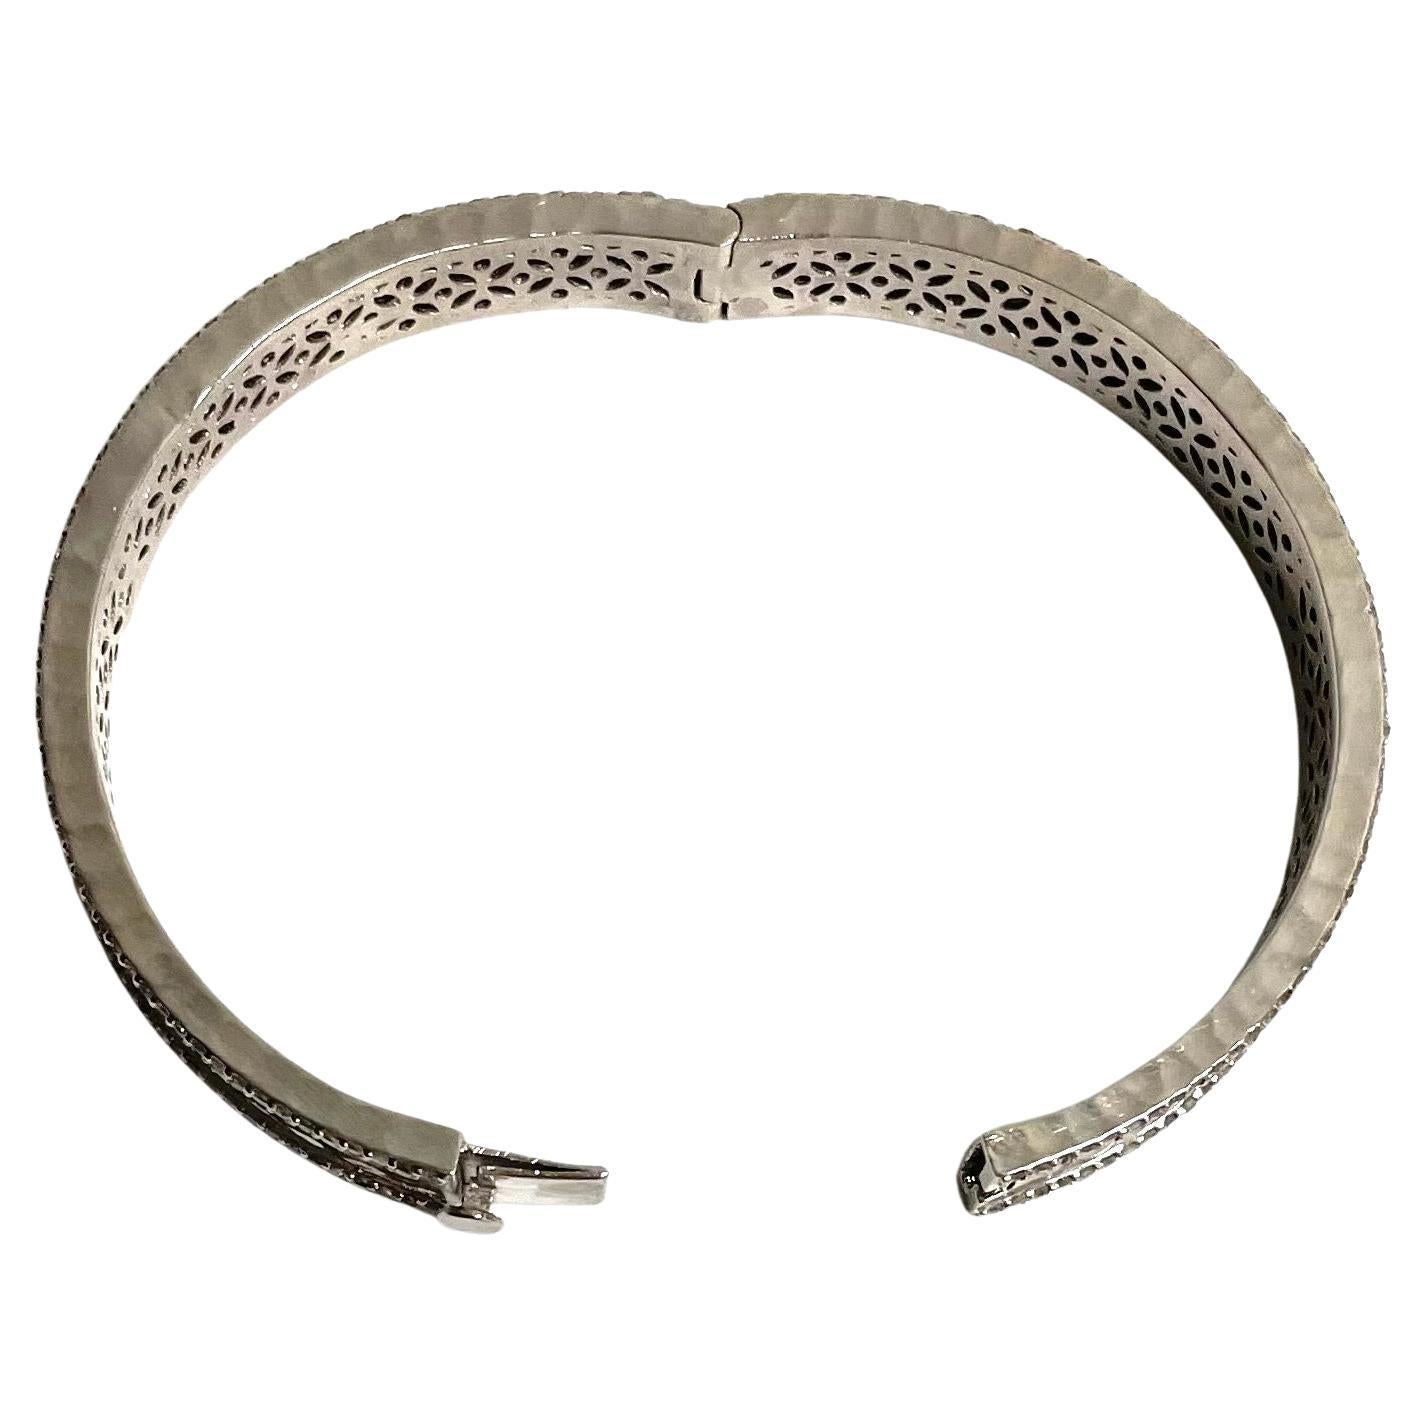 Description
Your elegance interlaced with your edgy style is echoed in this striking sterling silver bangle bracelet embellished with 2.90 carats of pave diamonds. Hammered by hand to create dazzling reflections when catching the light, it is sure